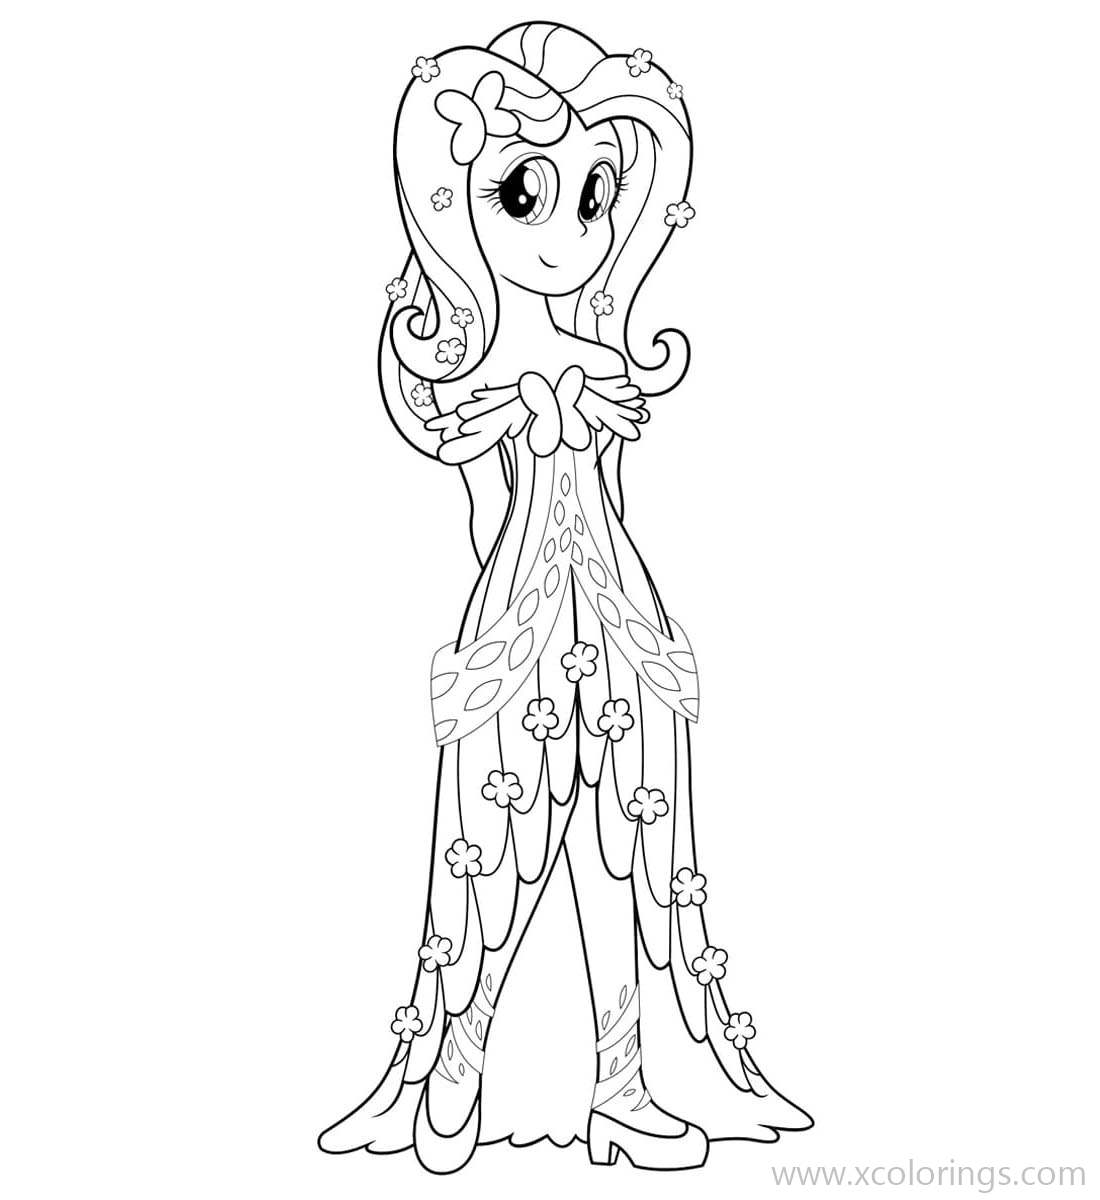 Free Equestria Girls Coloring Pages Cute Fluttershy printable